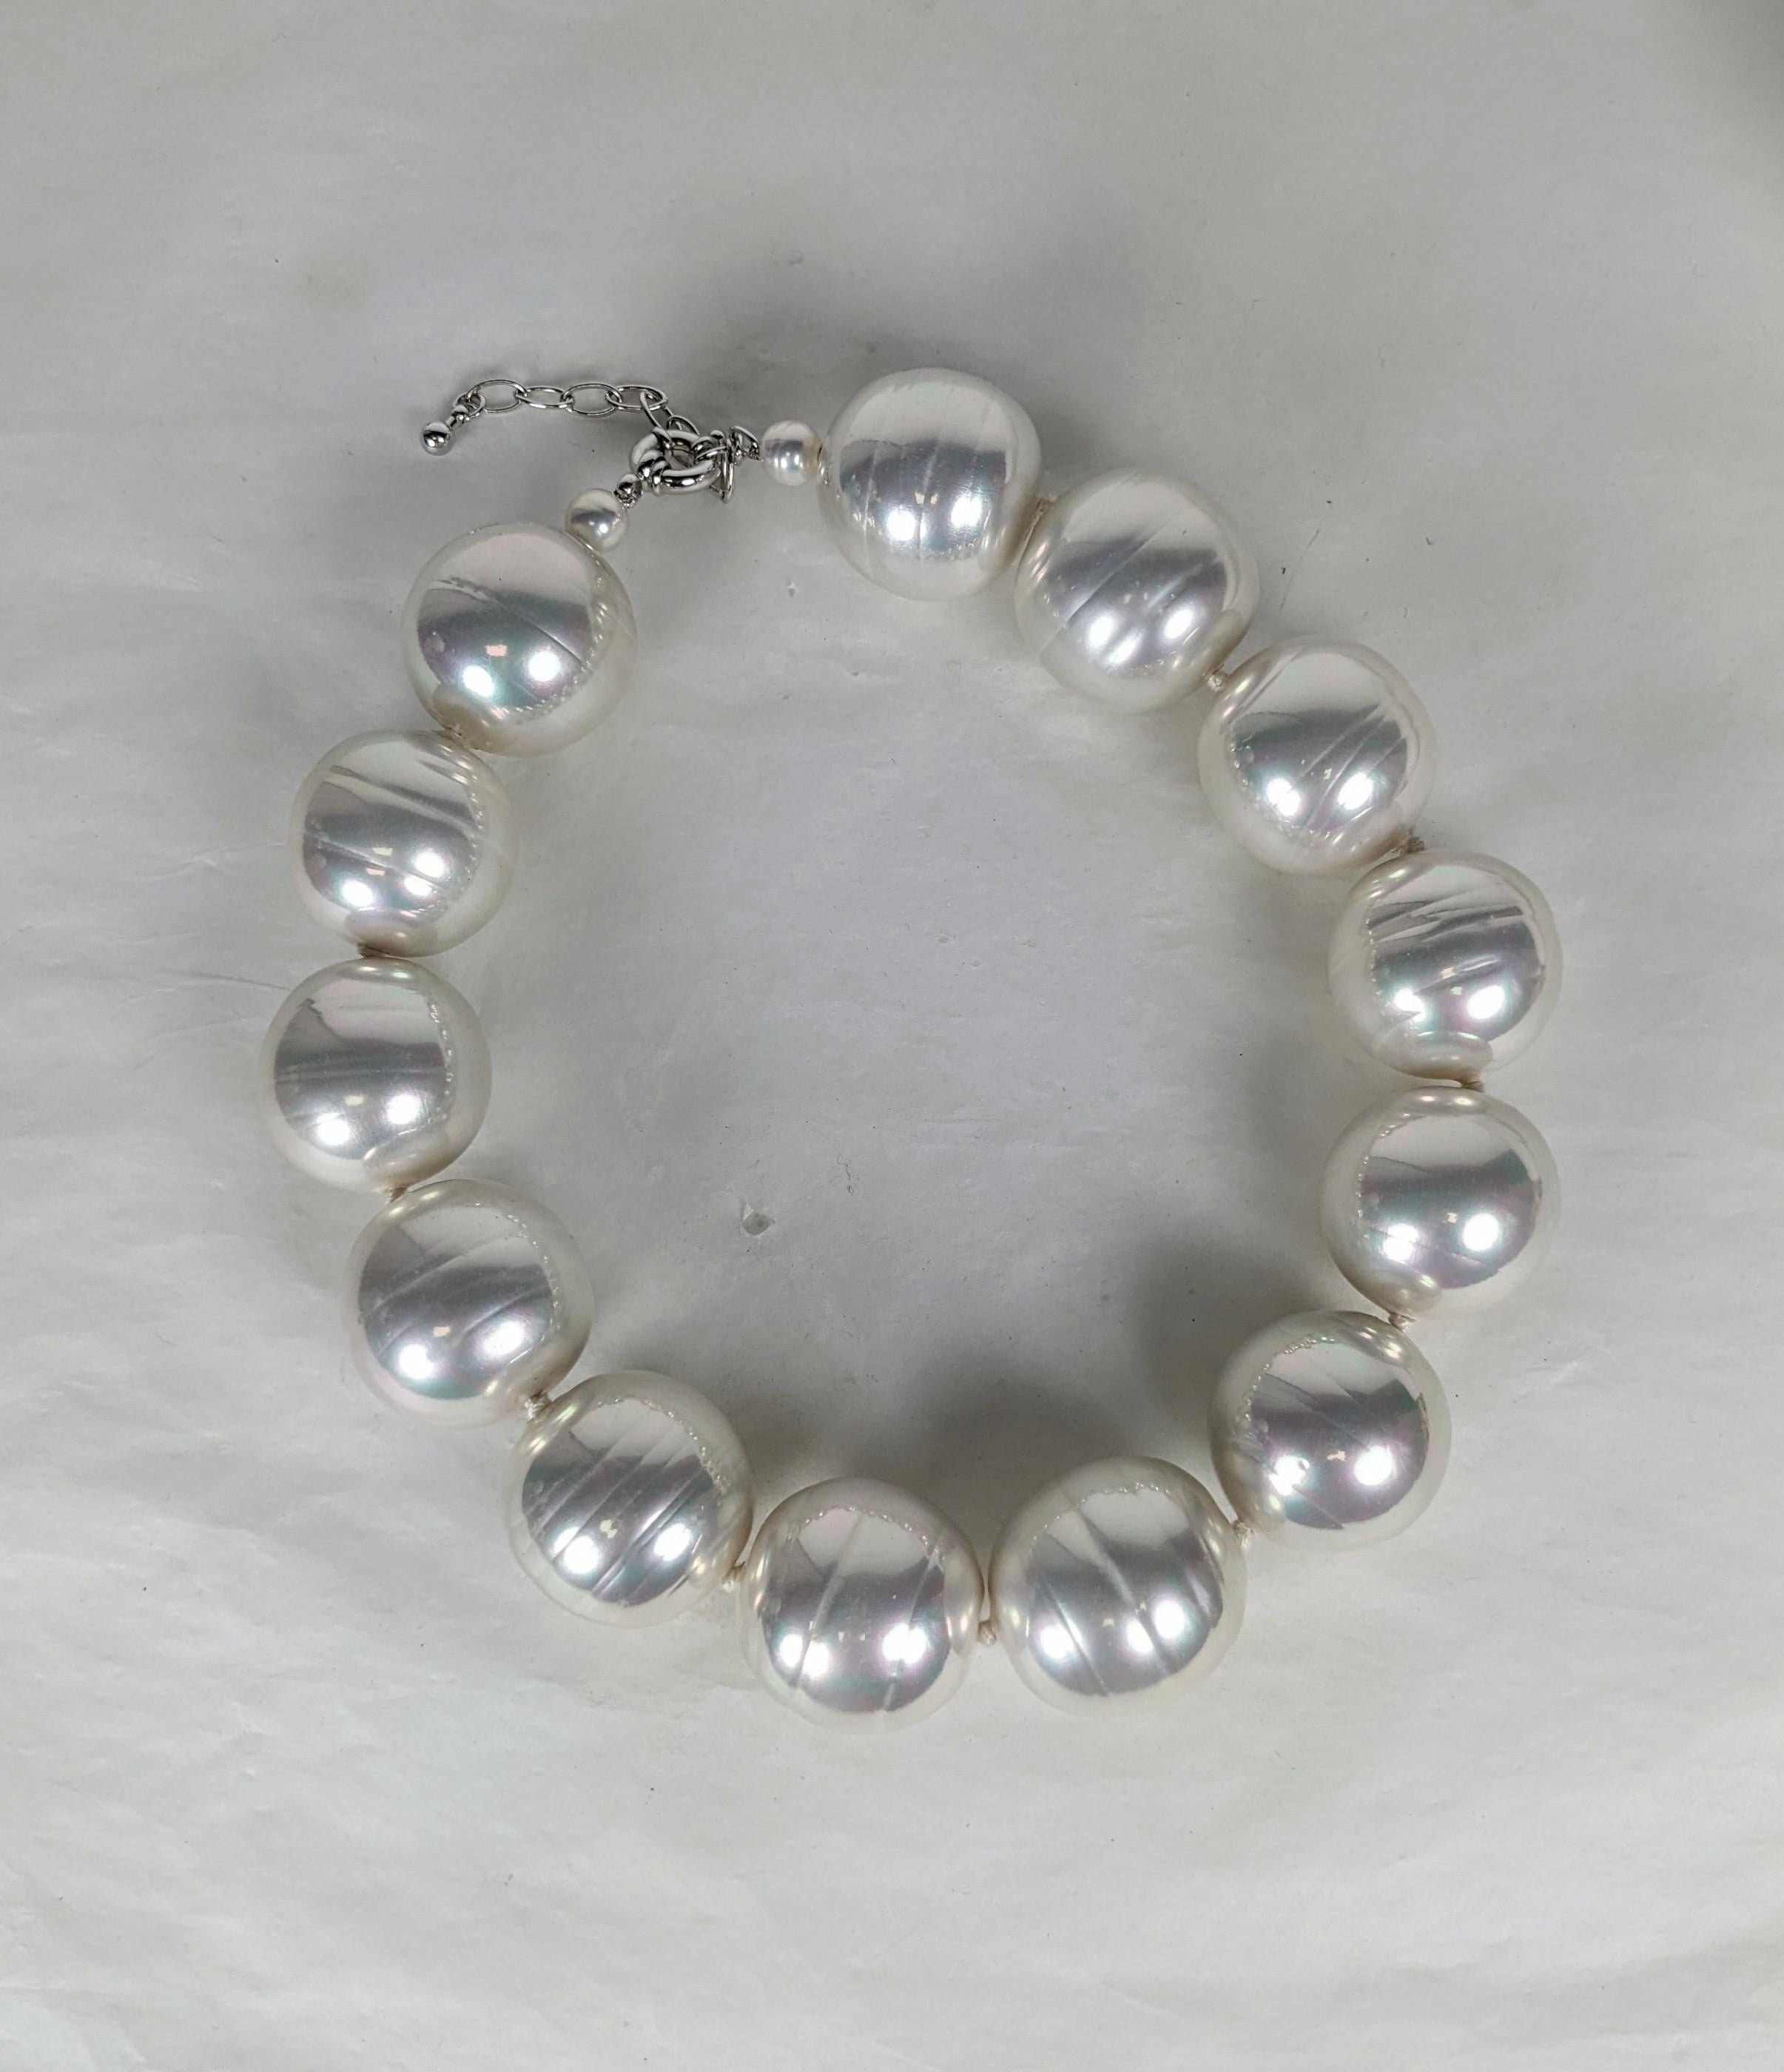 Oversized High Quality Faux Baroque Pearls from the 1980's when bigger was better. 30mm across like small golf balls which are hand knotted. Please note they are quite heavy which is less noticeable when worn and evenly distributed. 1980's USA.